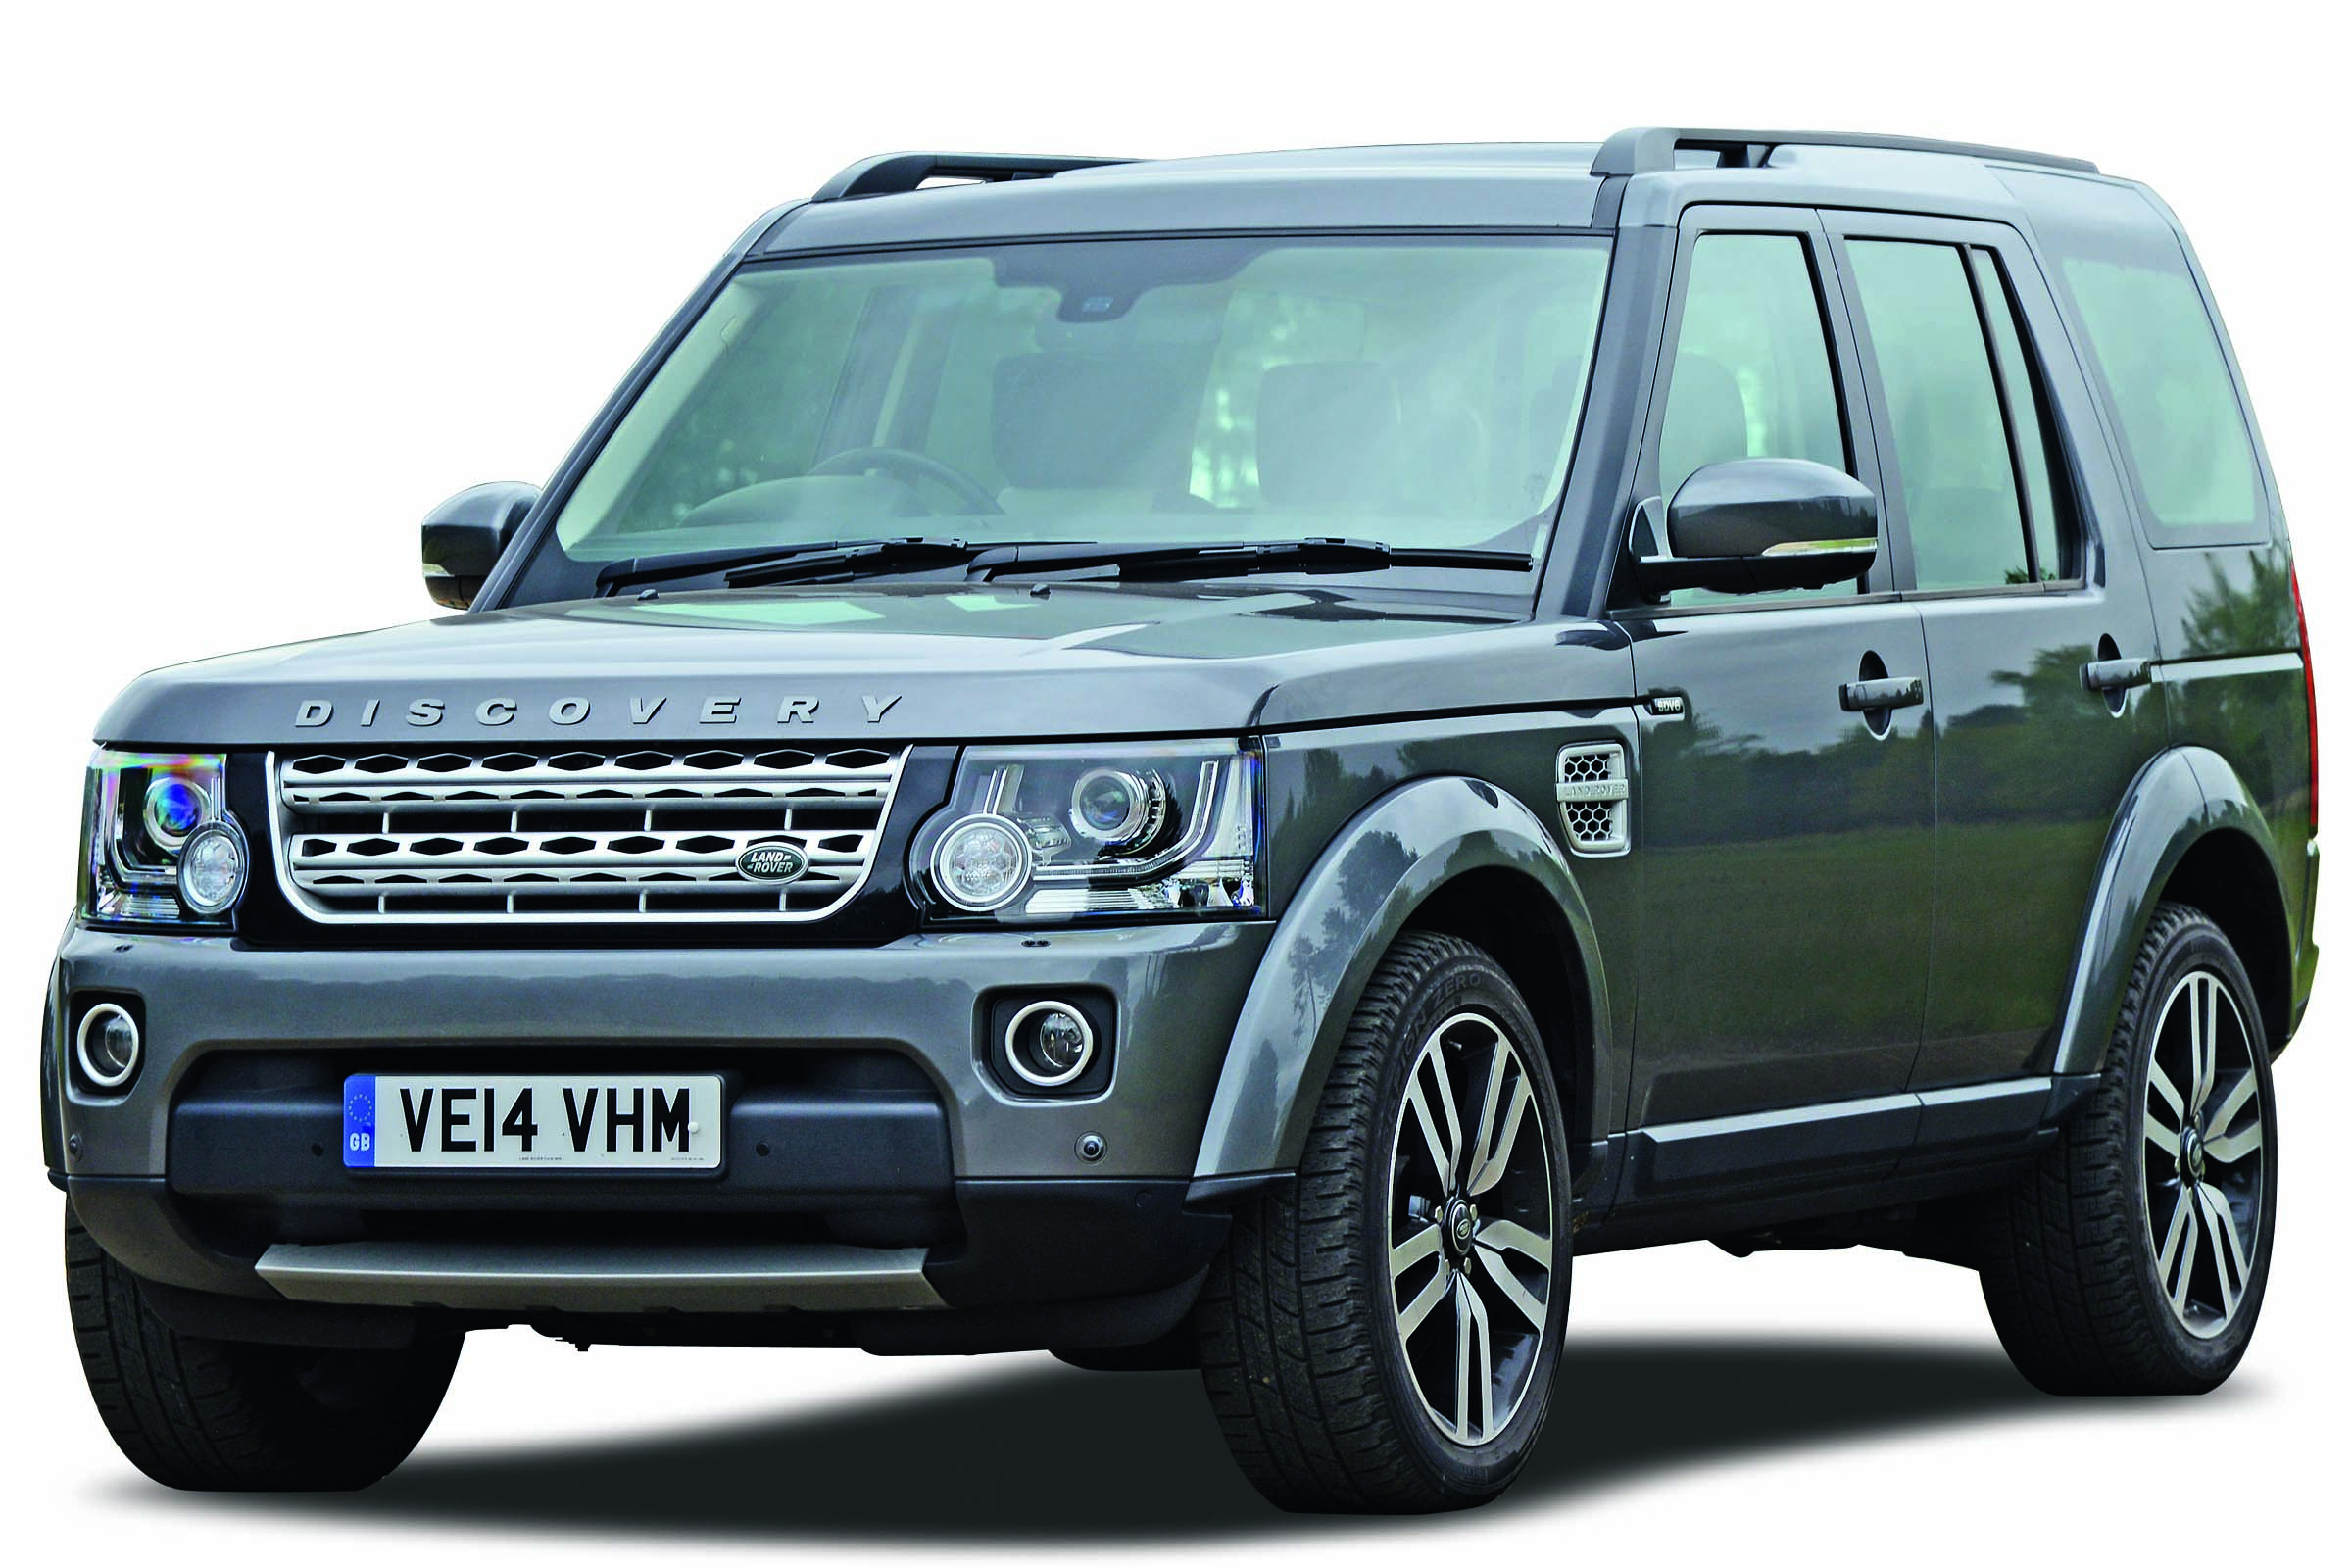 2021 Land Rover Discovery Release Date, Price and Changes